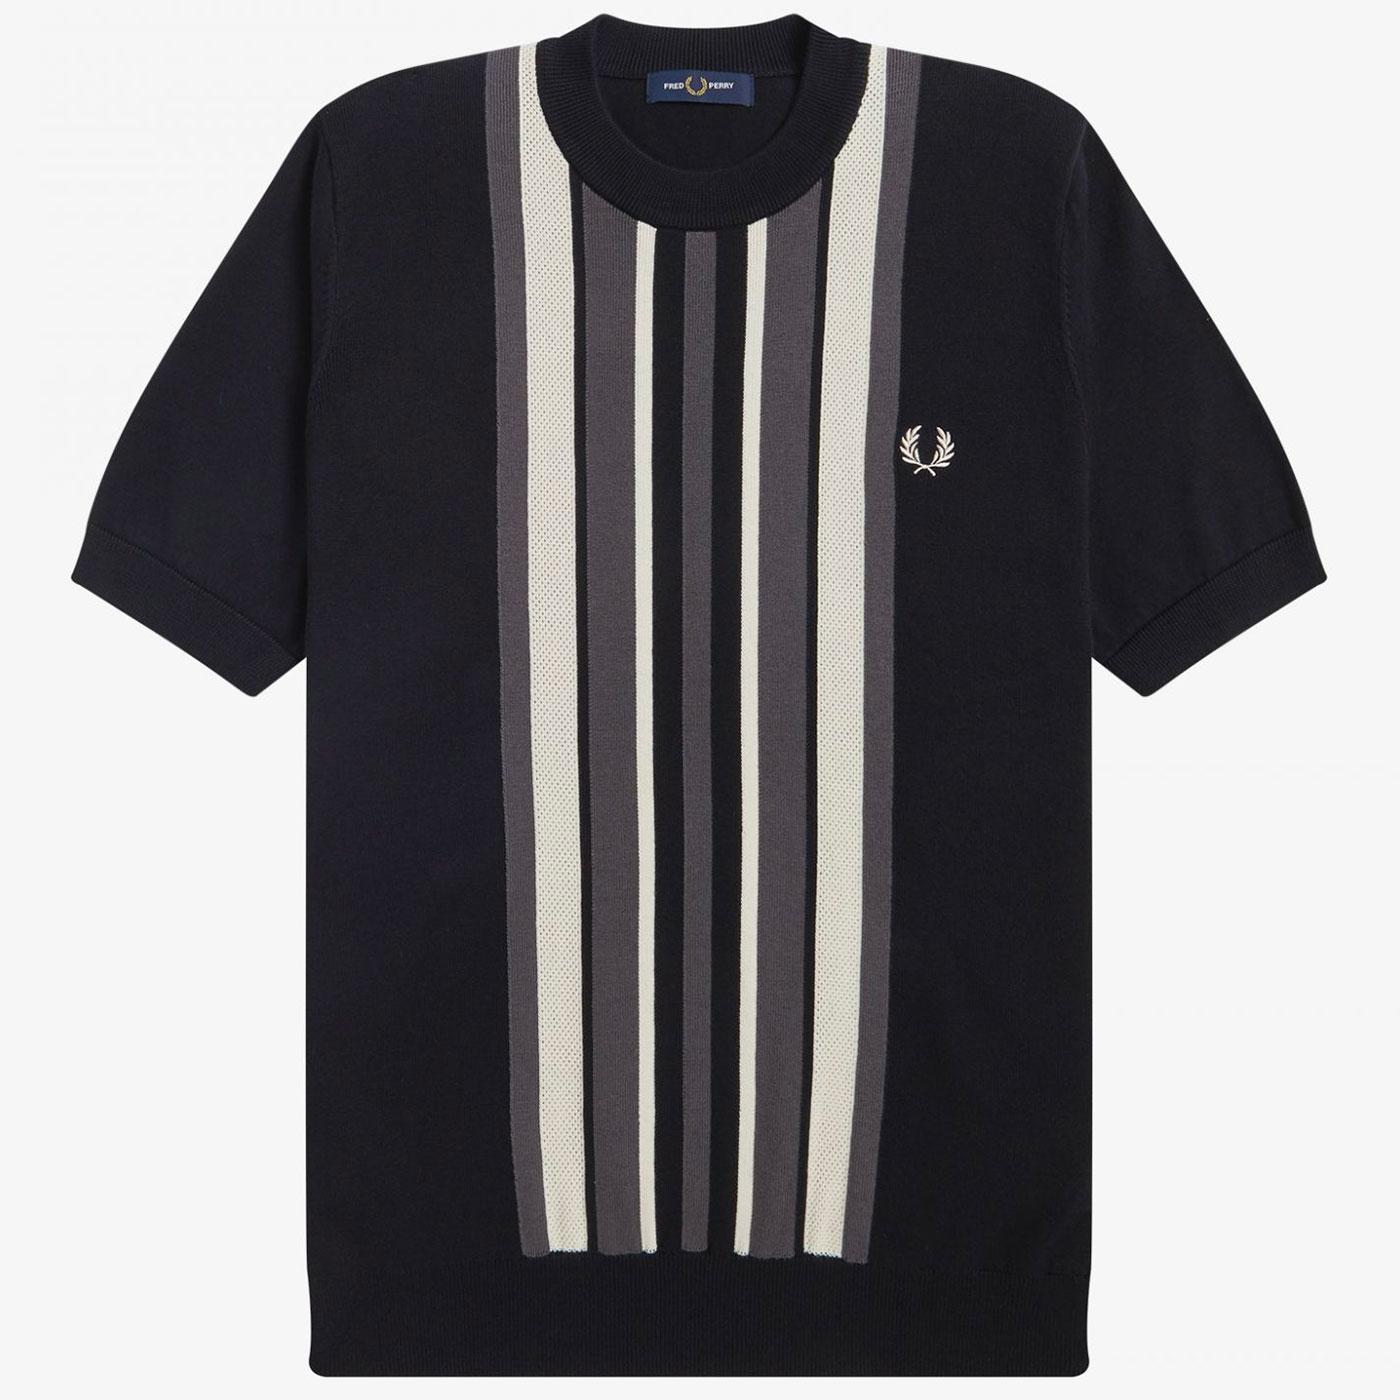 FRED PERRY 60s Mod Texture Stripe Knitted T-shirt